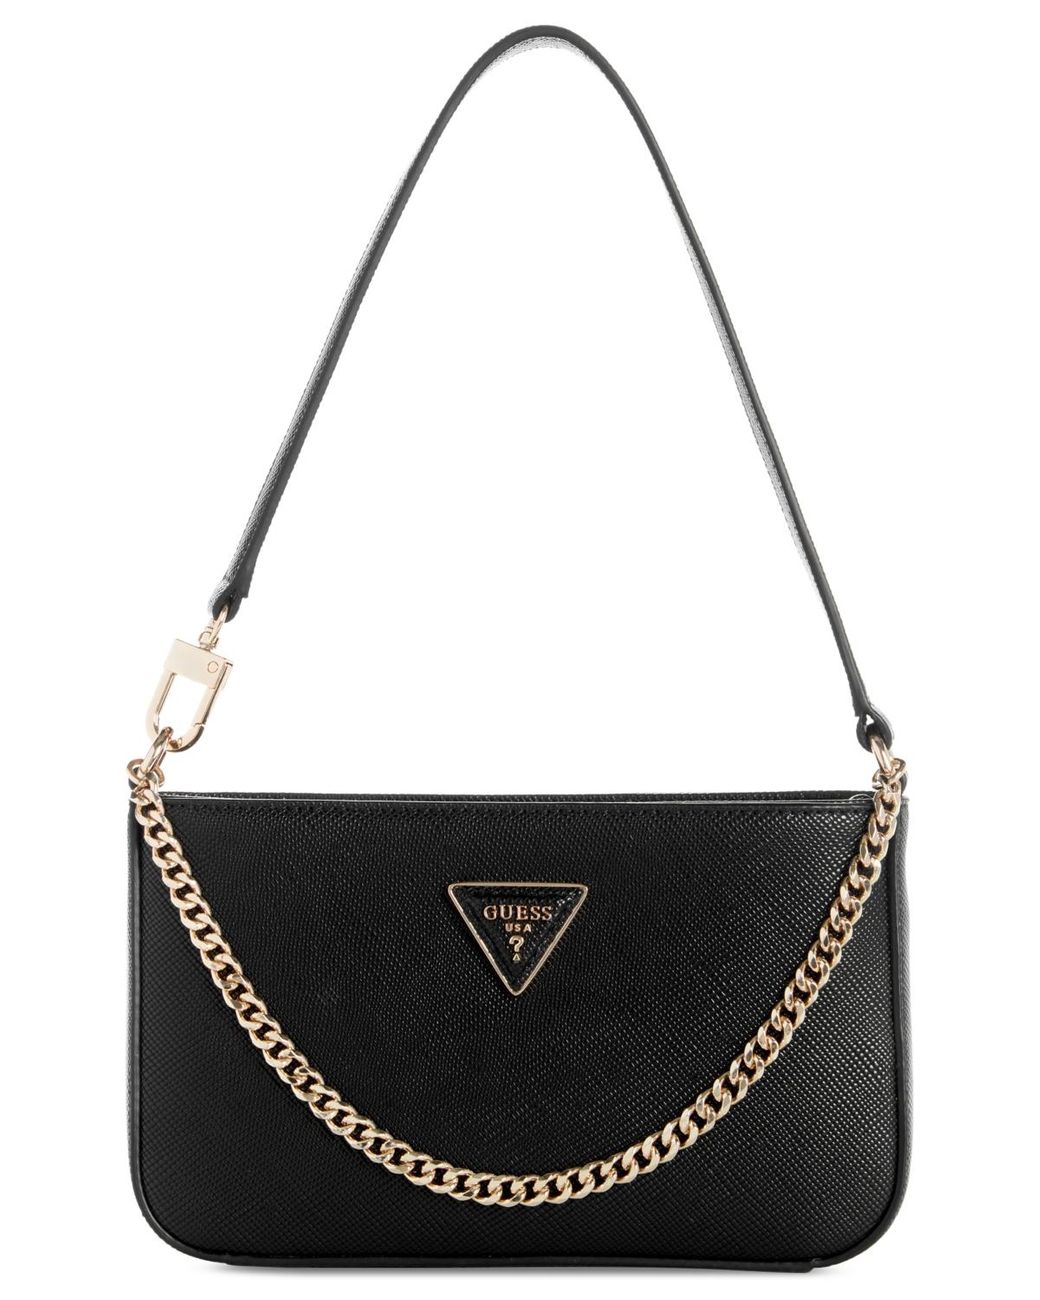 Guess Brynlee Small Top Zip Shoulder Bag in Black | Lyst